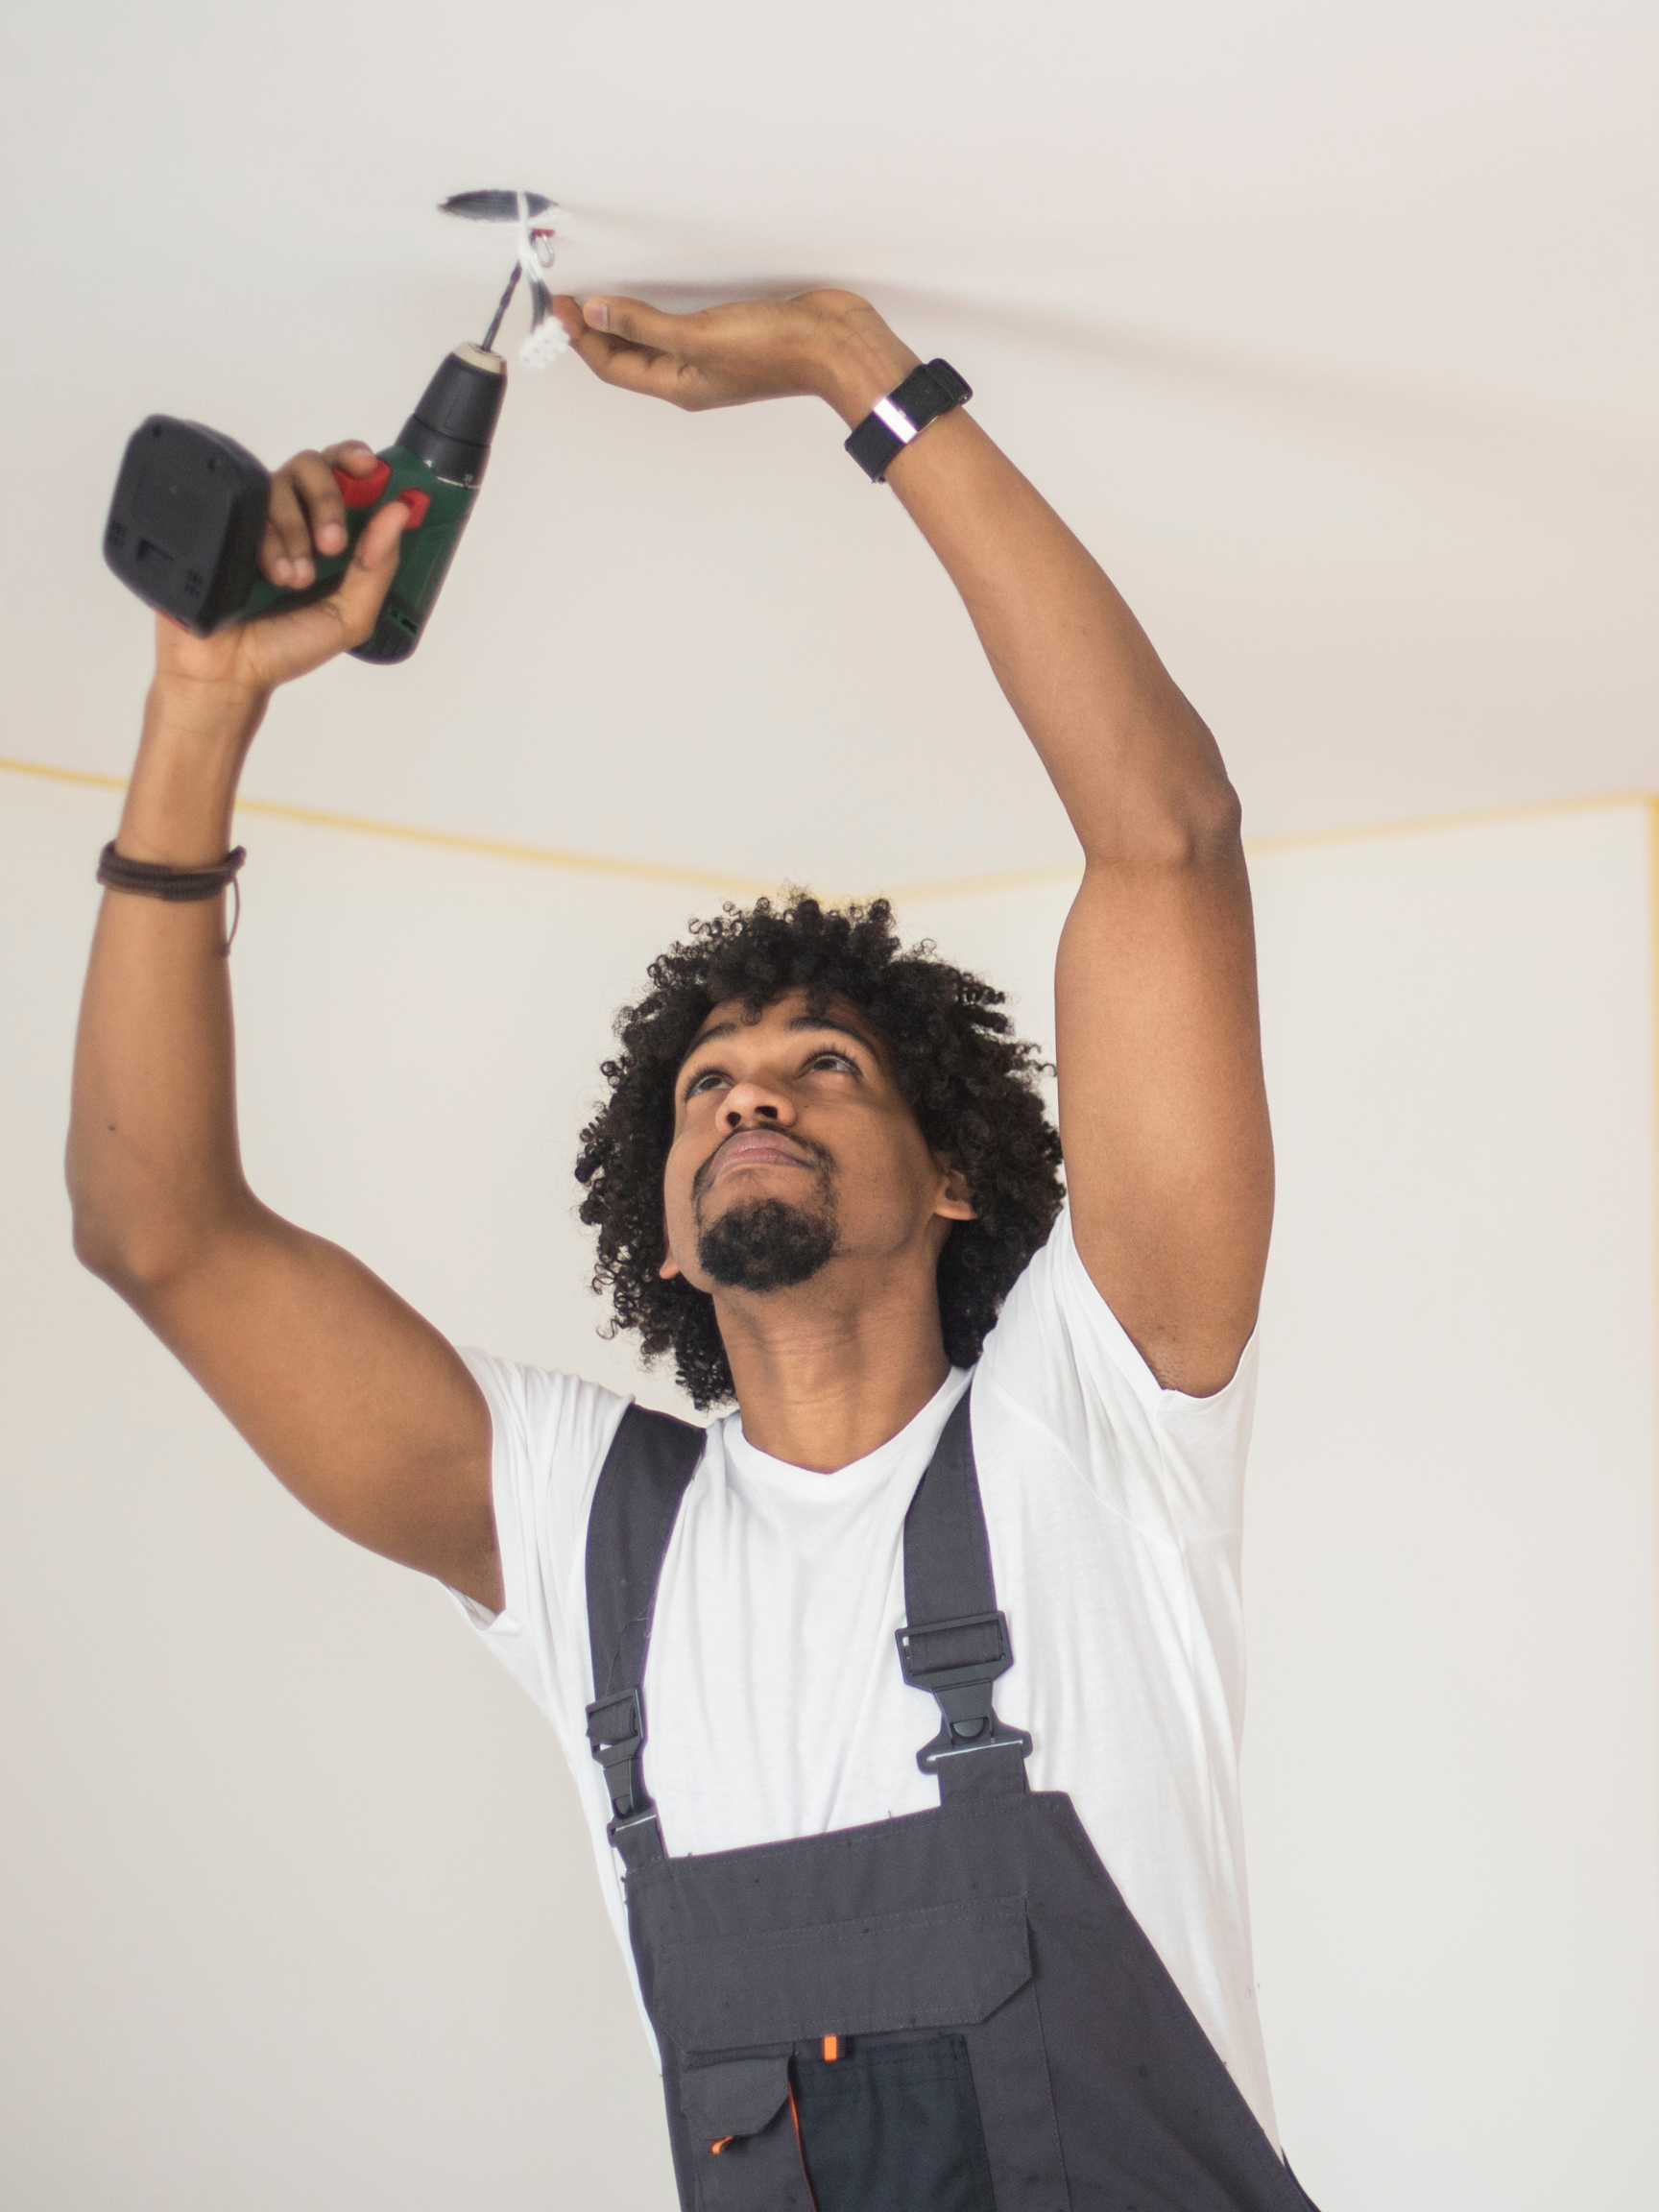 A man waring overalls and a white t-shirt using a drill to work on the electrical wiring in the ceiling